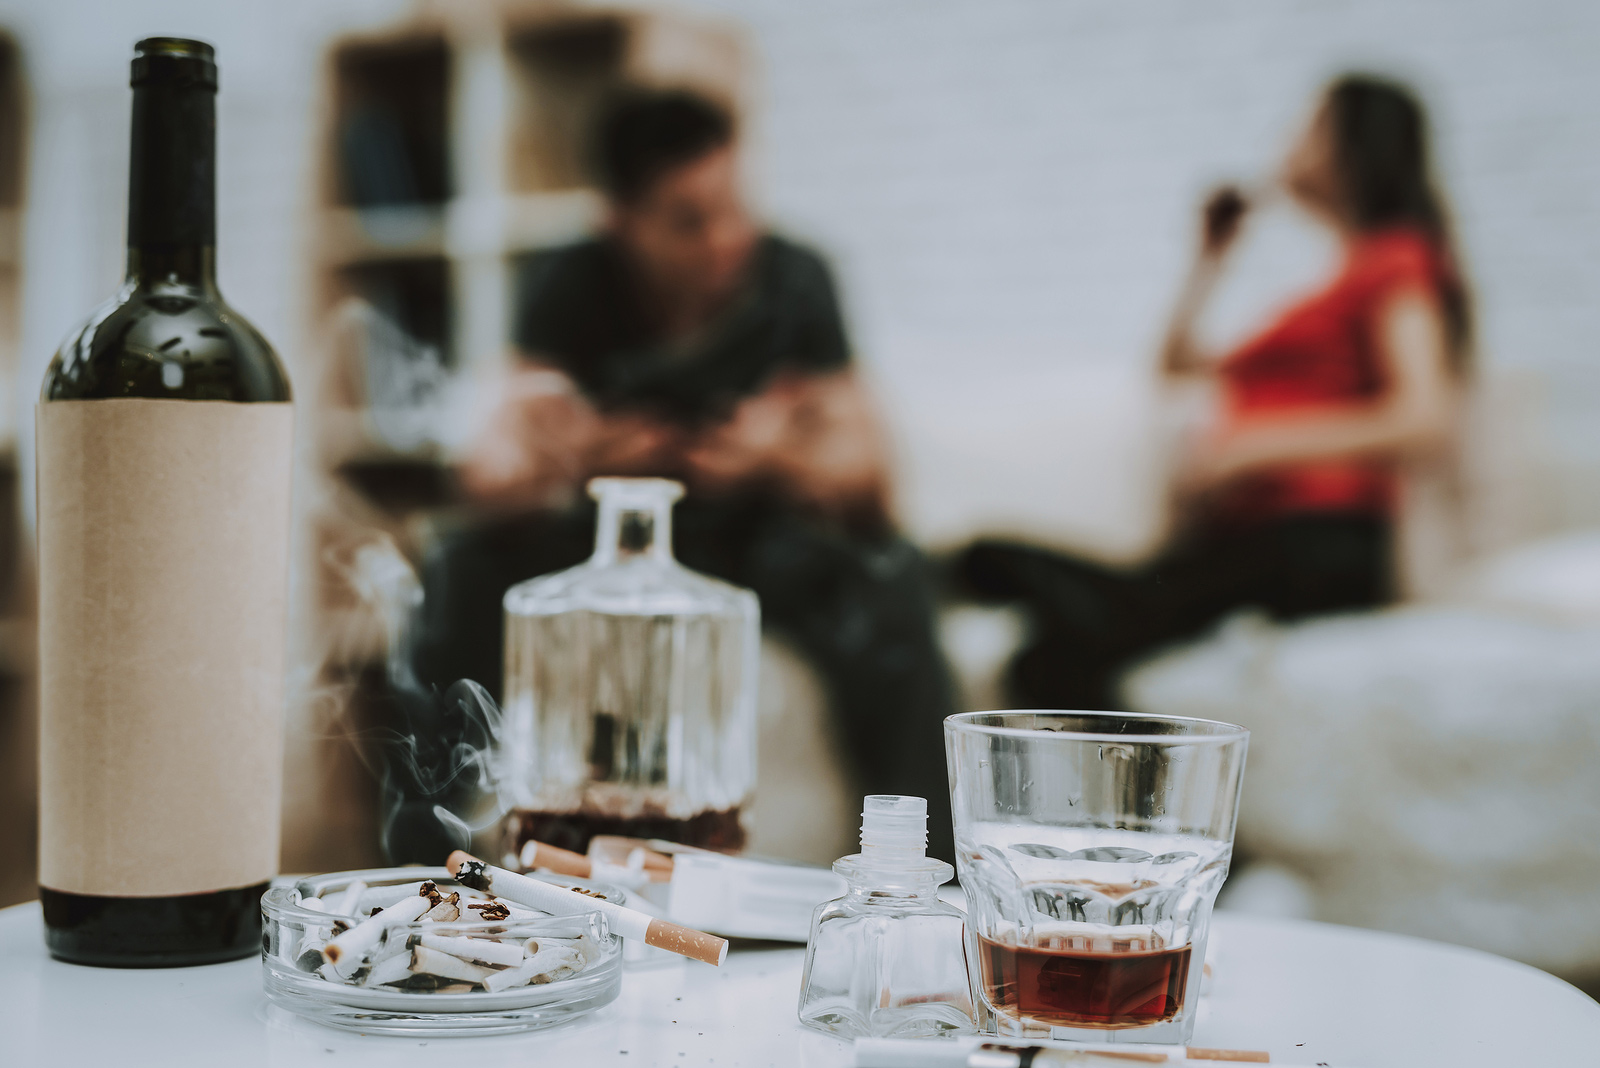 Two people drinking in the background and a whiskey decanter and glass on a table in the foreground representing alcohol abuse. Alcohol abuse treatment in Baltimore, MD for alcoholic adults dealing with Substance abuse needing treatment. New Connections Counseling Center can help in MD, 21210